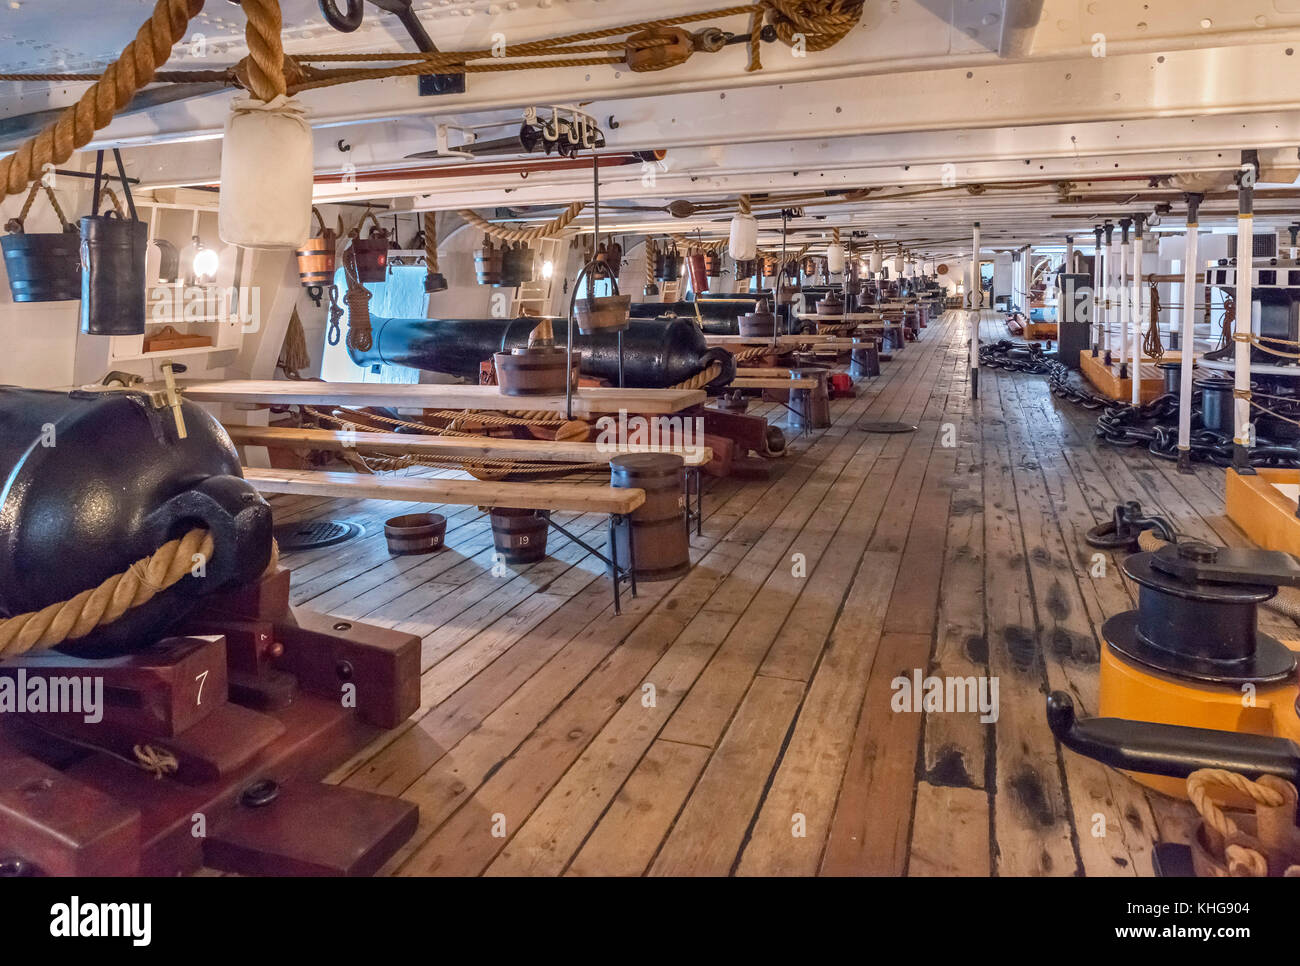 Gundeck on HMS Warrior, the first ocean going ironclad steam frigate in the Royal Navy, Portsmouth Historic Dockyard, Hampshire, England, UK Stock Photo